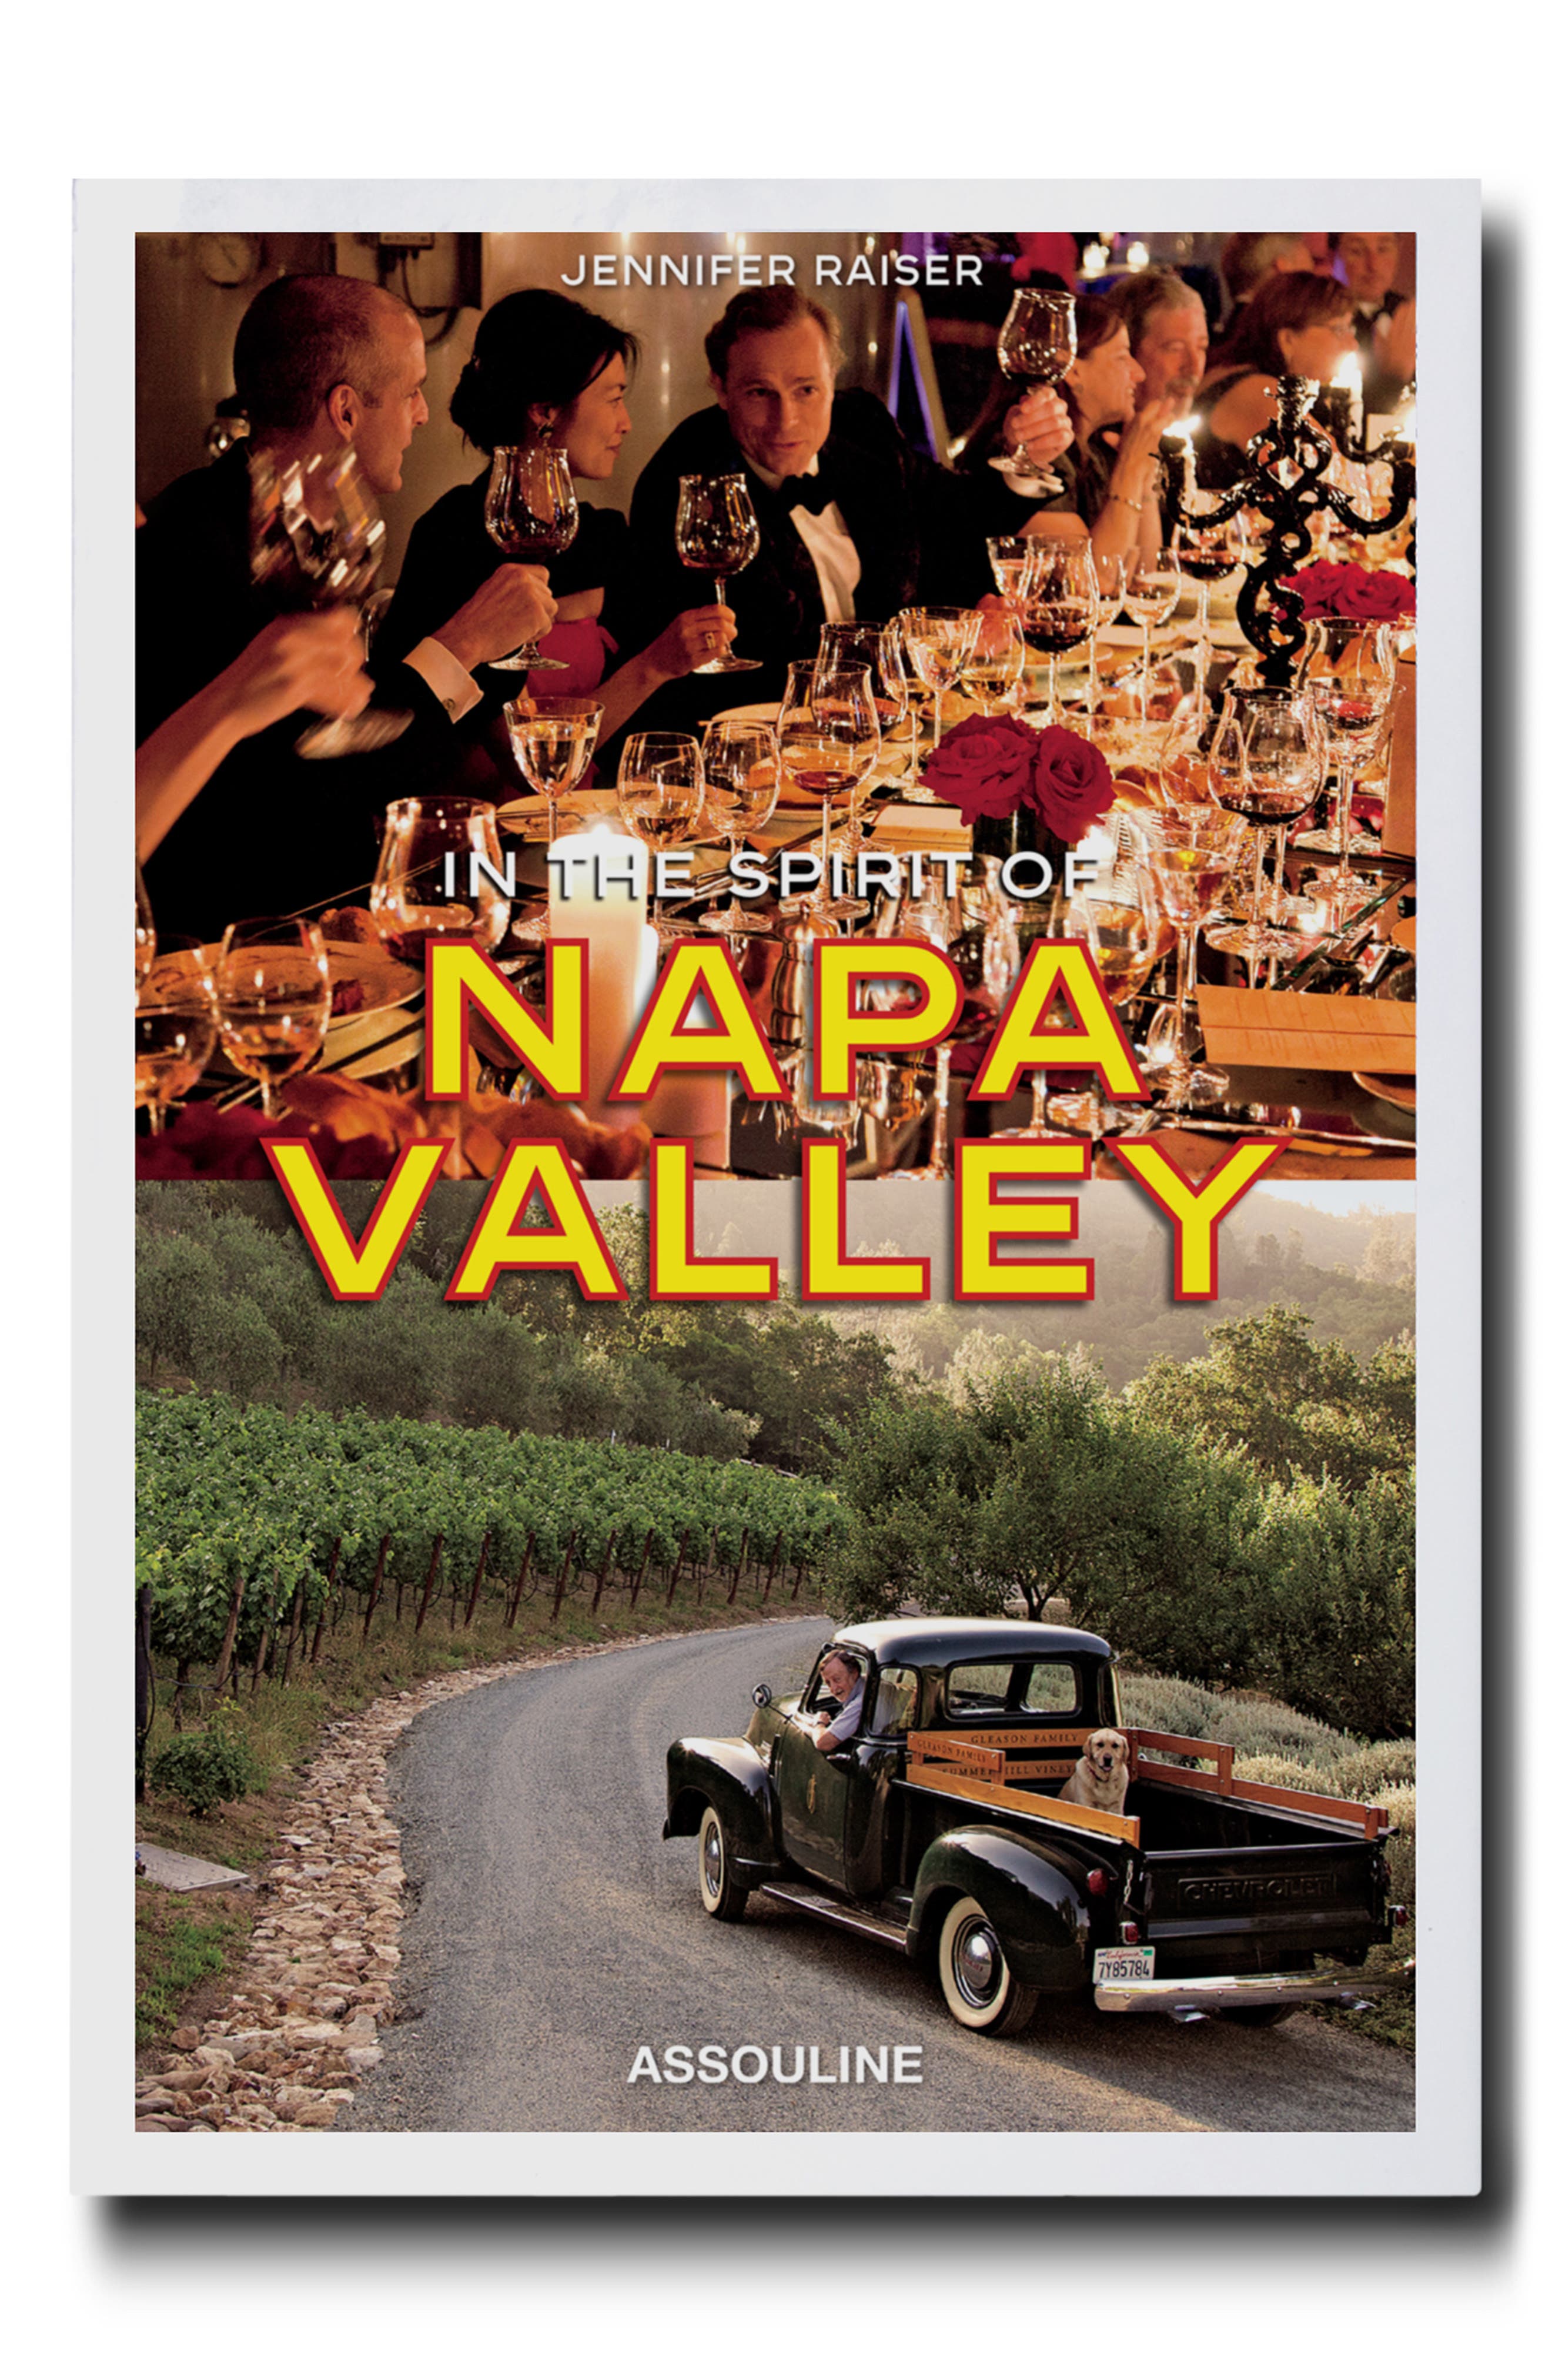 ISBN 9781614284390 product image for 'In The Spirit Of Napa Valley' Book | upcitemdb.com